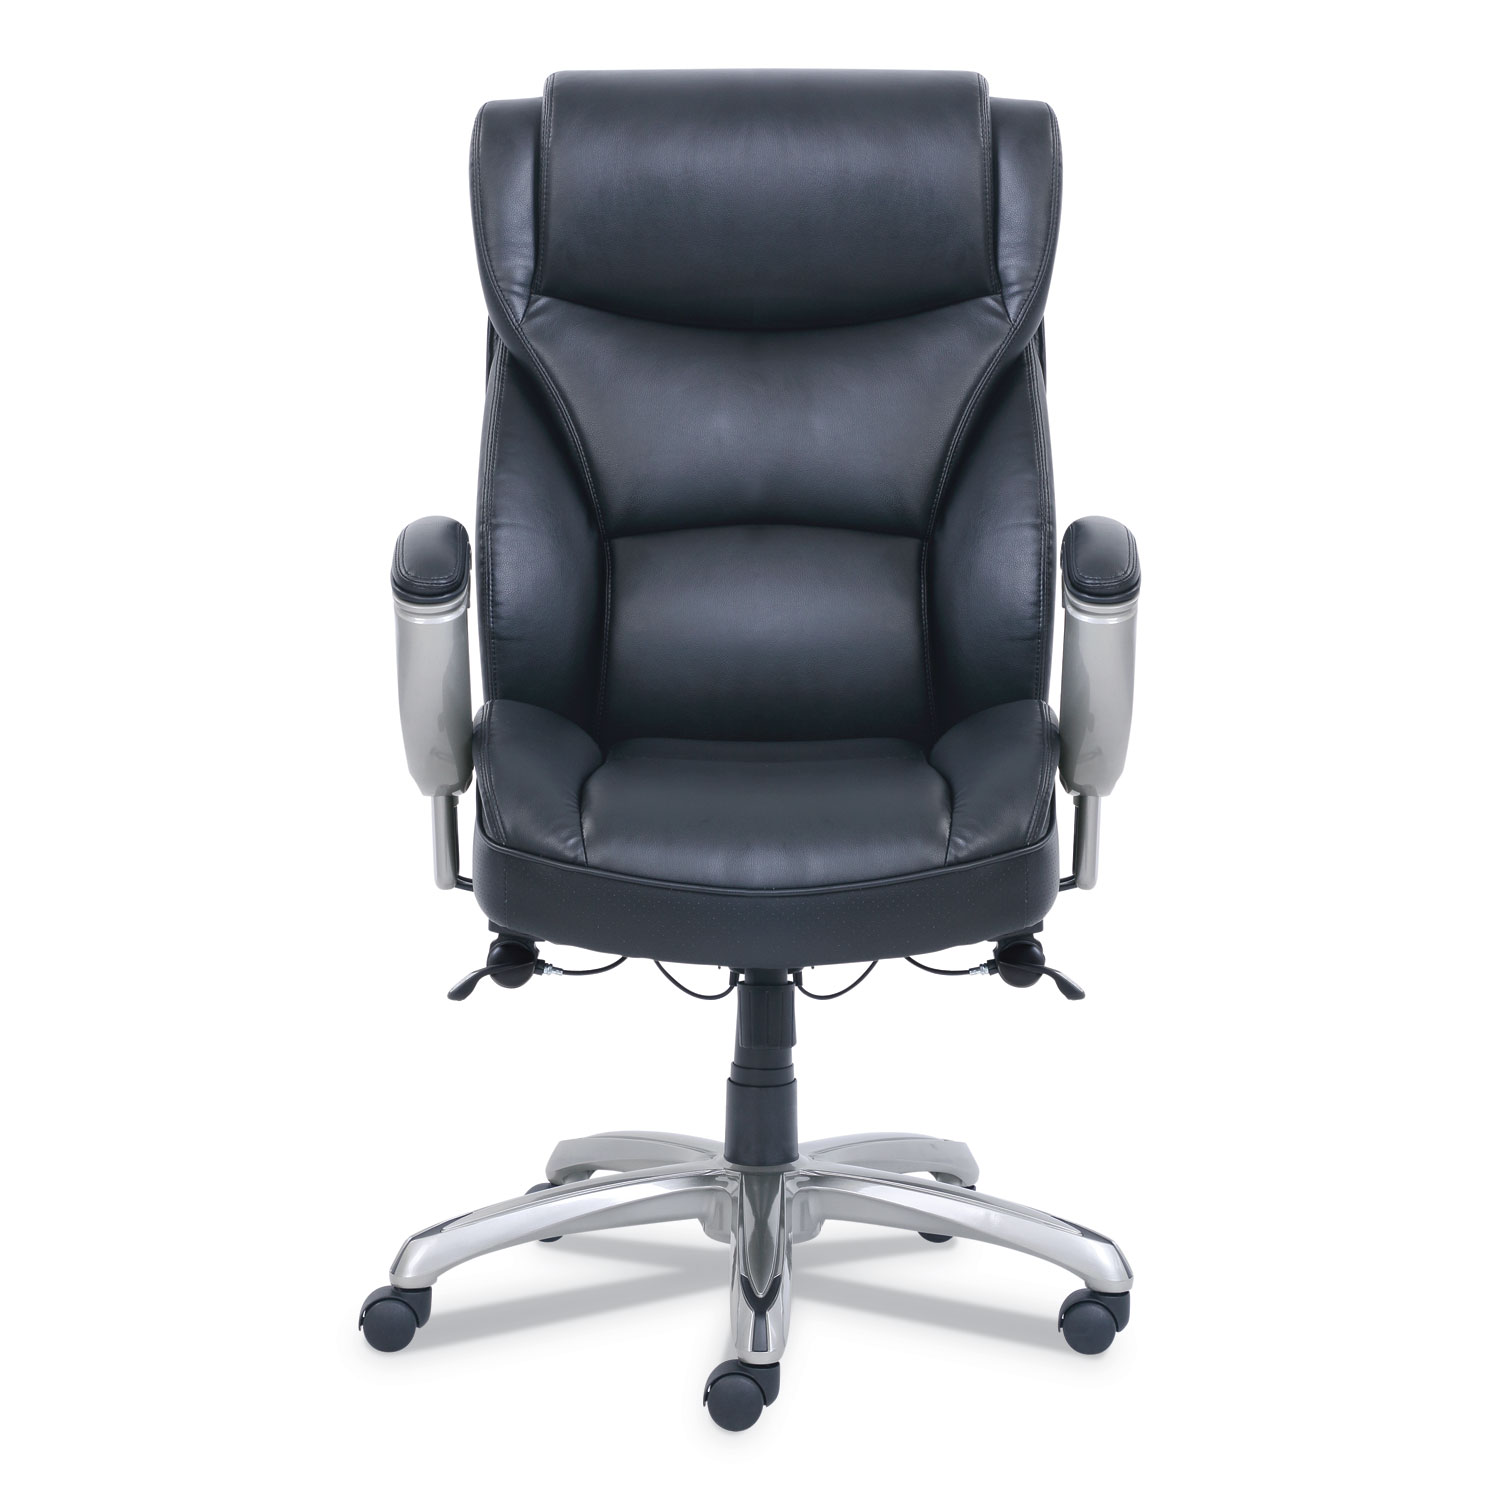 Emerson Big and Tall Task Chair, Supports up to 400 lbs., Black Seat/Black Back, Silver Base